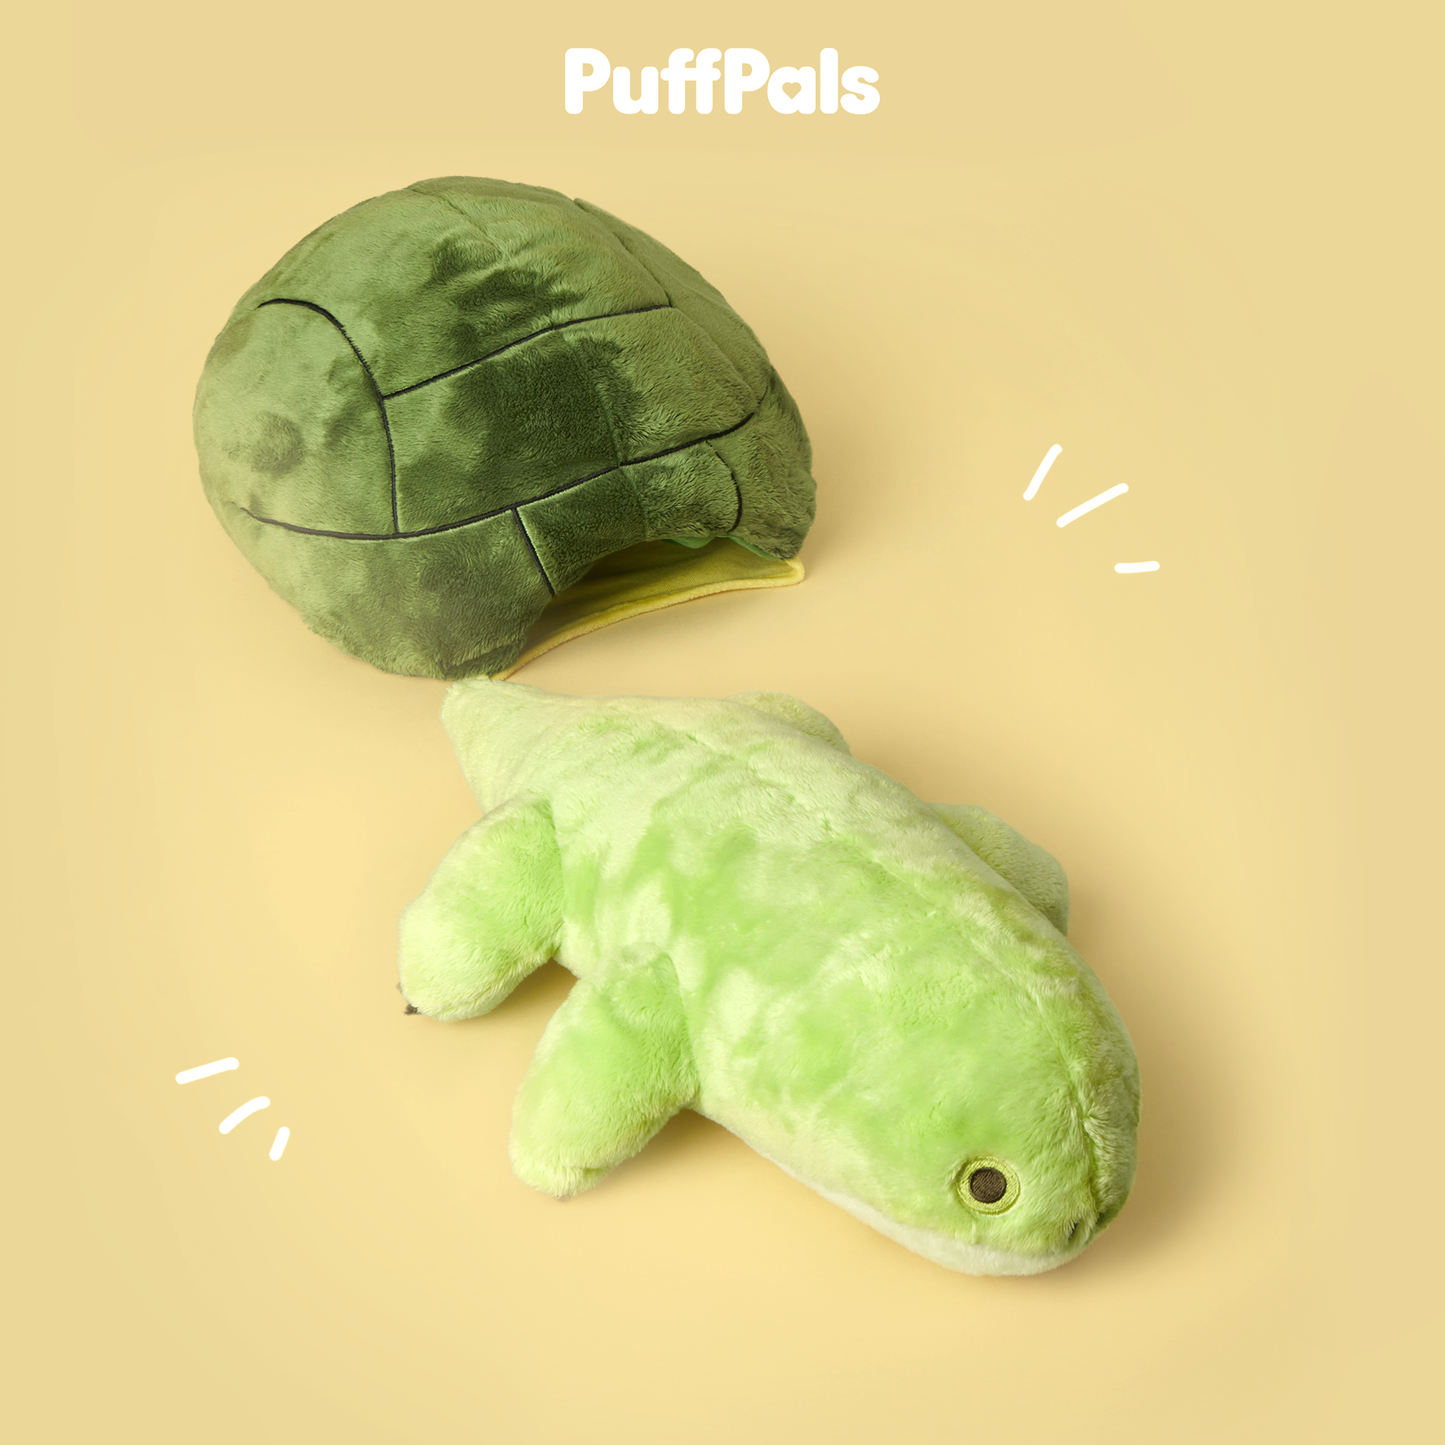 Noot the "Turtle" PRE-ORDER